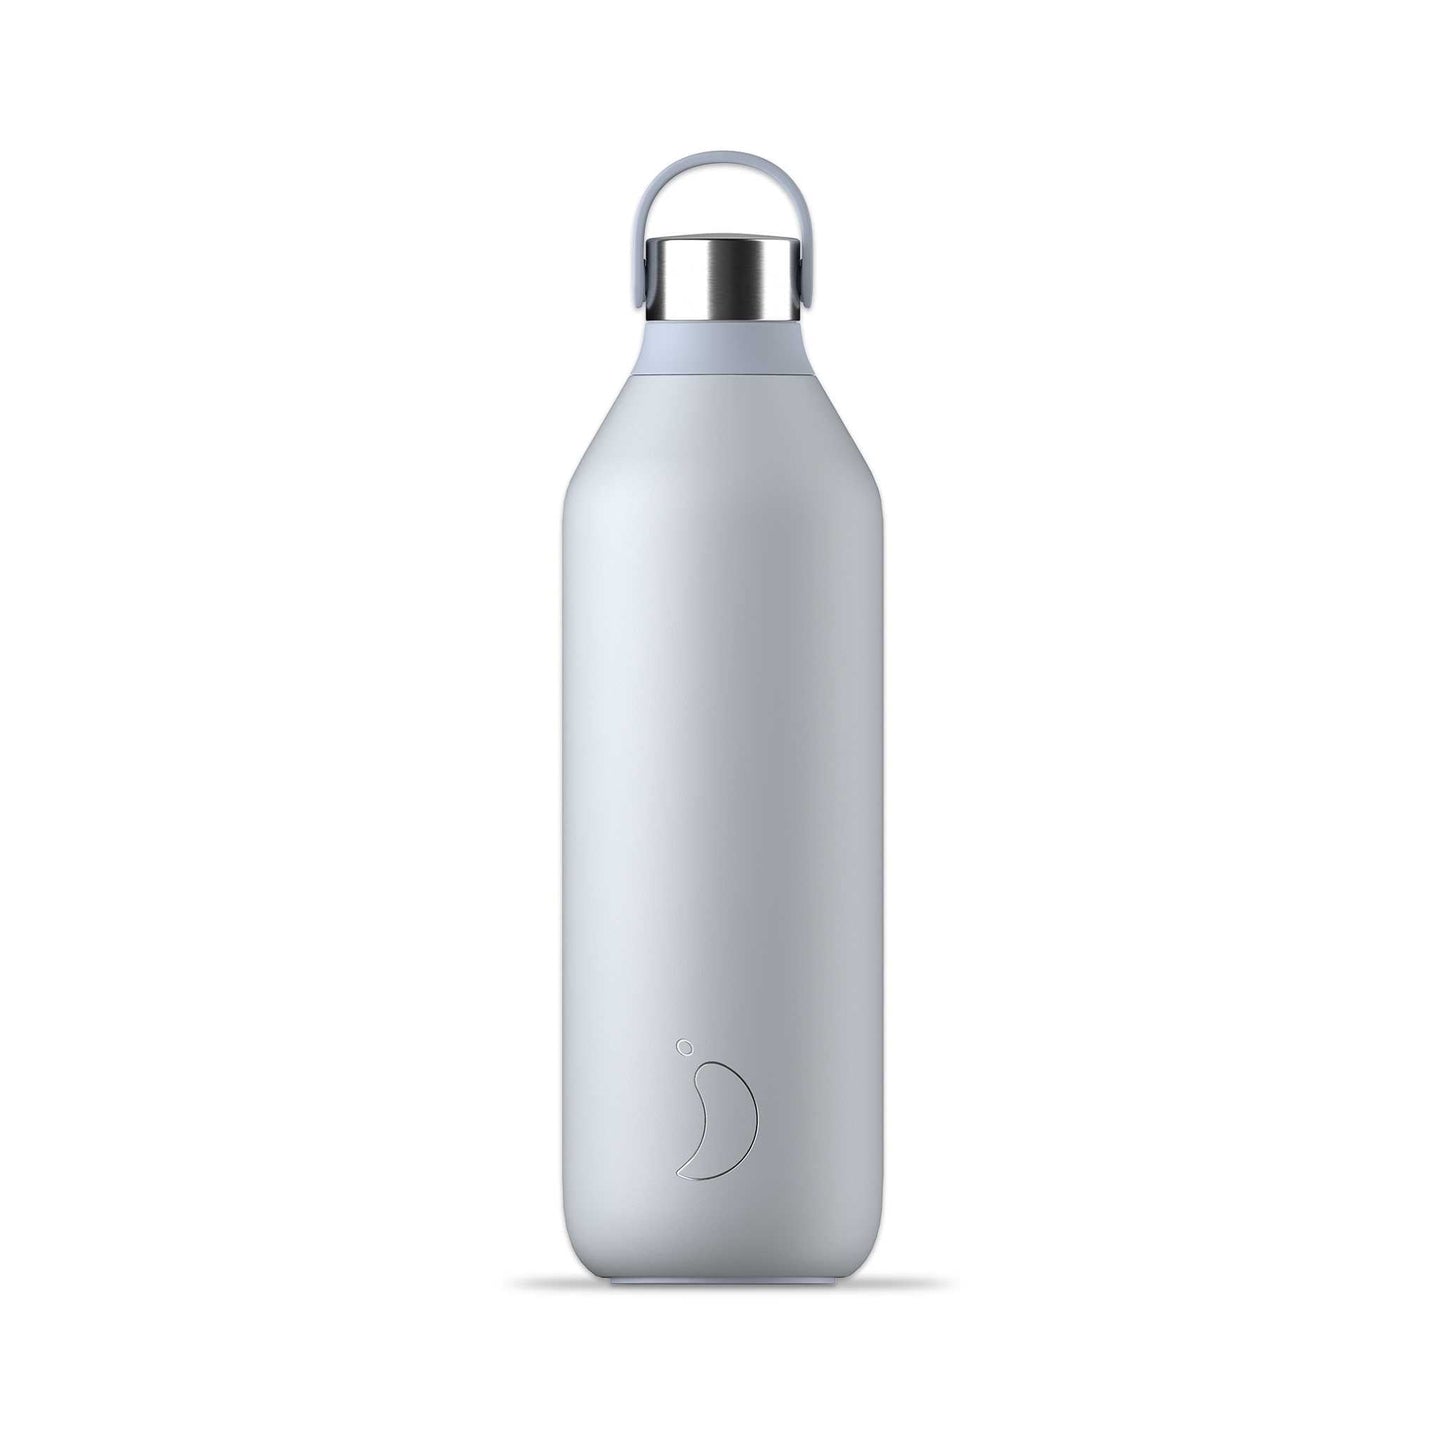 Chilly's Water Bottles Chilly's Series 2 Insulated Drinks Bottle - 1L - Frost Blue